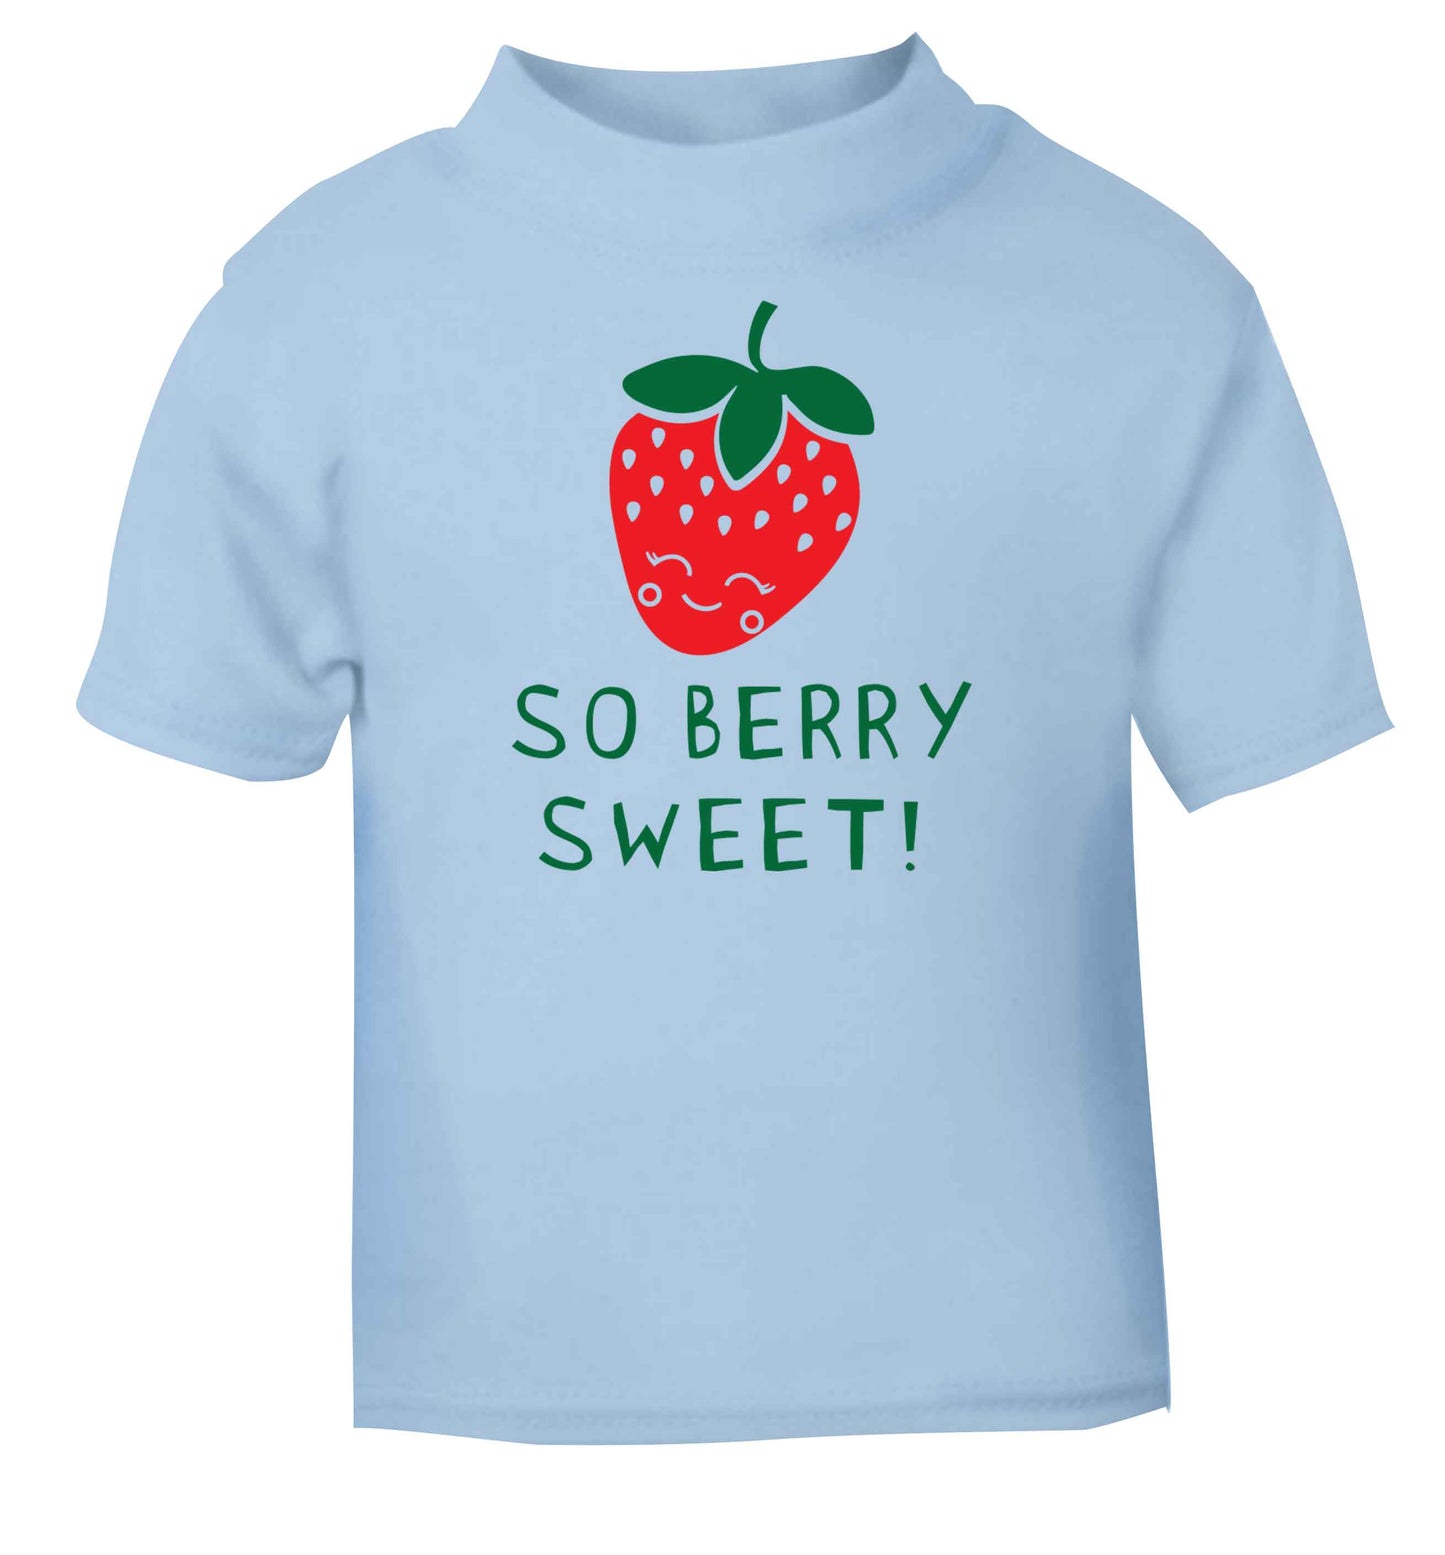 So berry sweet light blue baby toddler Tshirt 2 Years